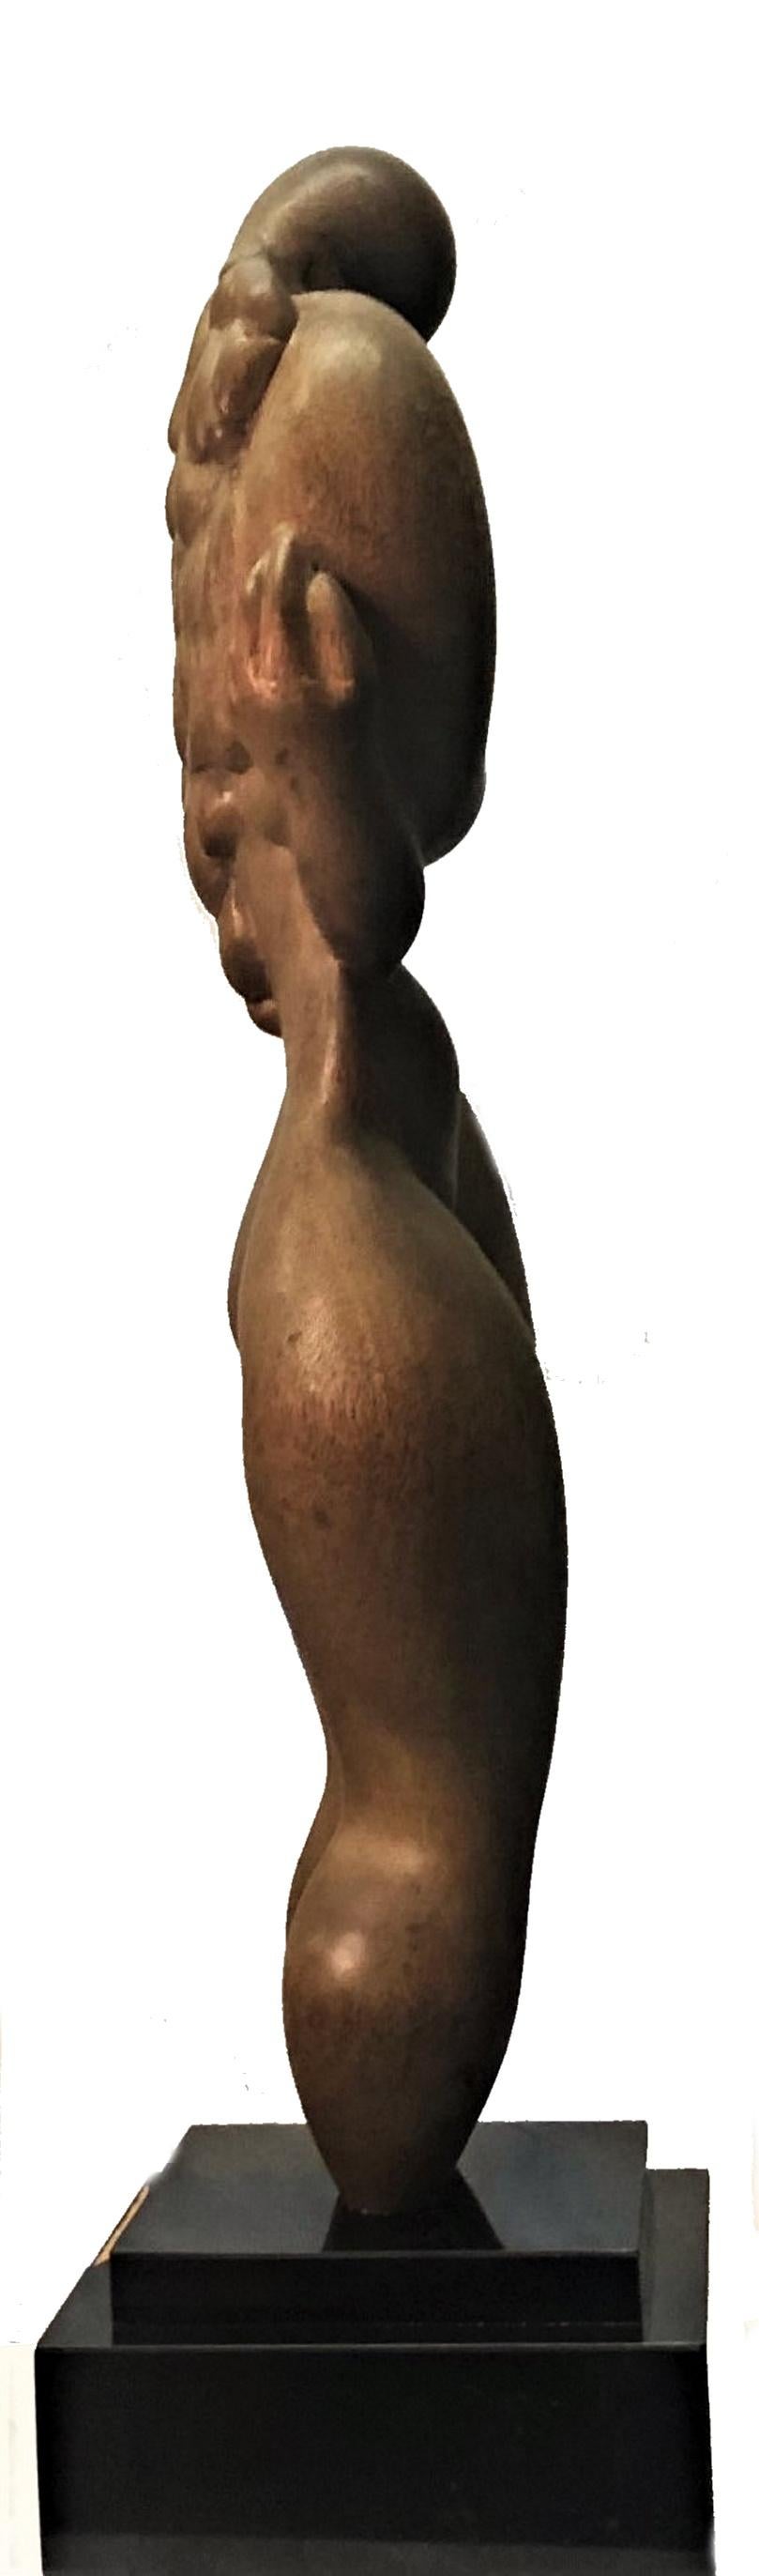 Mahogany Self-Embrace, Mid-Century American Modern Wood Sculpture by Needle, Ca. 1960 For Sale